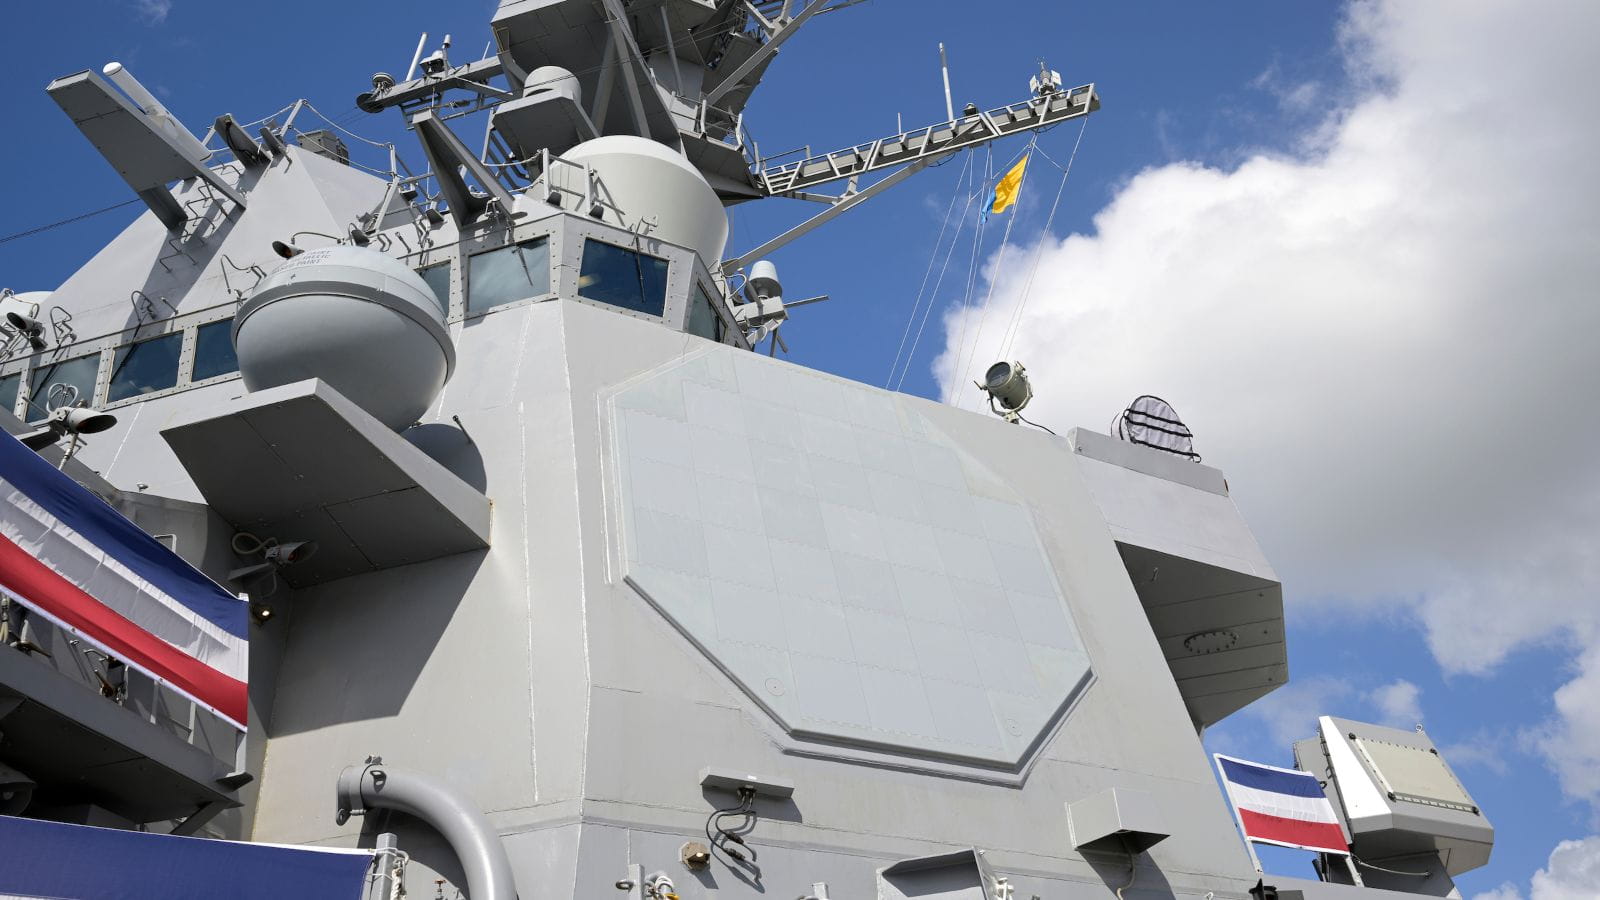 The USS Jack H. Lucas’ radar, the SPY-6 (V)1, has four array faces that provide nonstop 360-degree protection.